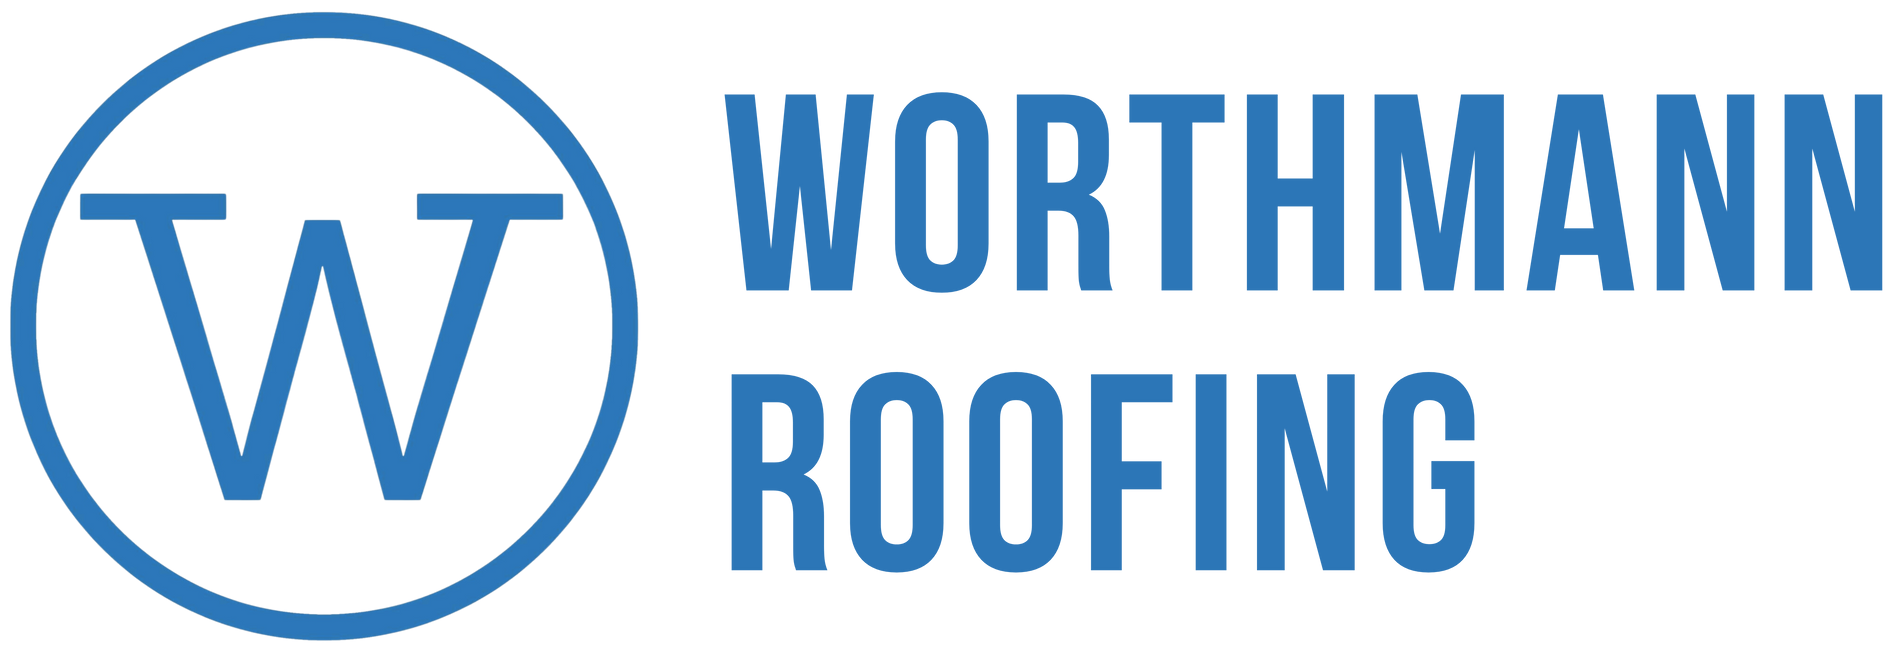 The logo for worthmann roofing is blue and white.